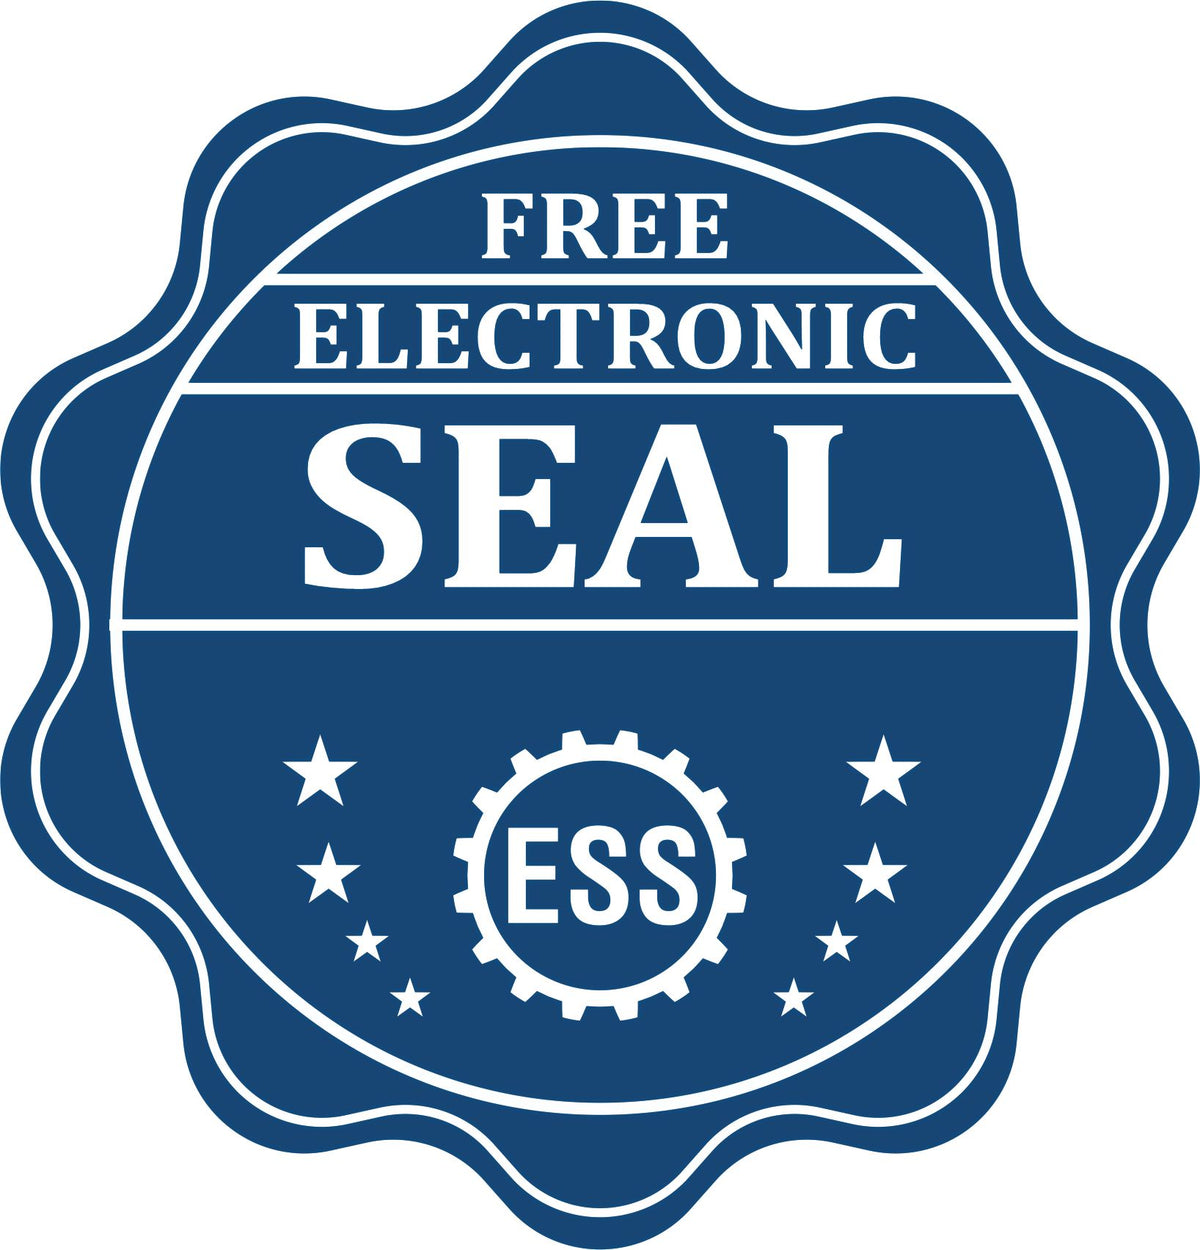 A badge showing a free electronic seal for the Gift South Carolina Landscape Architect Seal with stars and the ESS gear on the emblem.